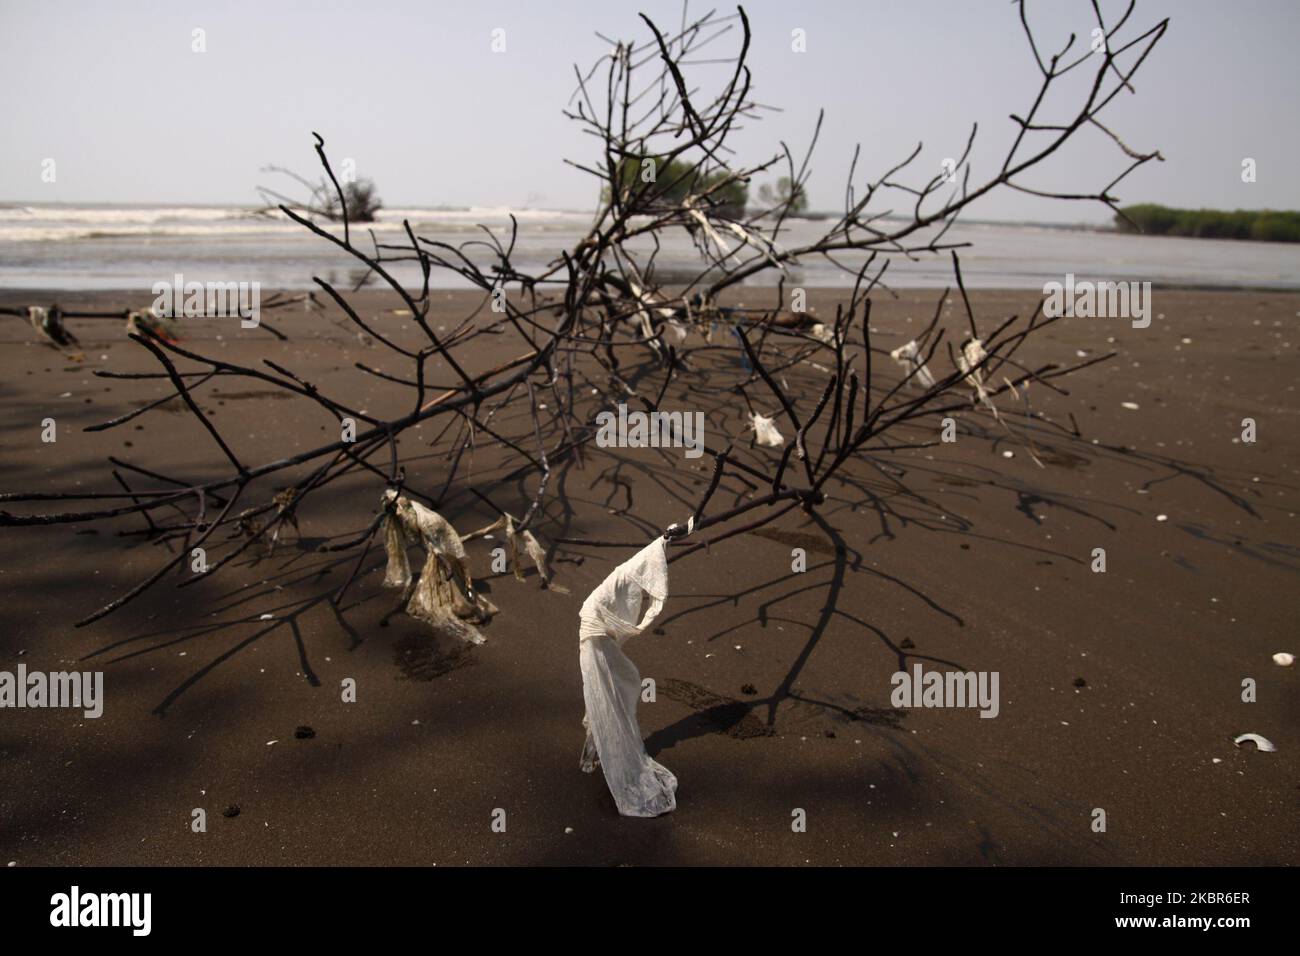 Plastic waste are seen stucks in the mangrove trunk after being carried by sea waves and stranded at Pantai Bahagia, Muara Gembong sub-district, Bekasi regency, West Java province, on June 13, 2020. According to the research reports from the Indonesian Institute of Sciences (LIPI), released in 2018, the amount of plastic waste in the Indonesian sea reaches 100.000 - 400.000 tons per year, with an average coastline spread of arround 1.71 pieces per square meter with an average weight of 46.55 grams per square meter. While the highest average plastic waste was found on the coast of Sulawesi, rea Stock Photo